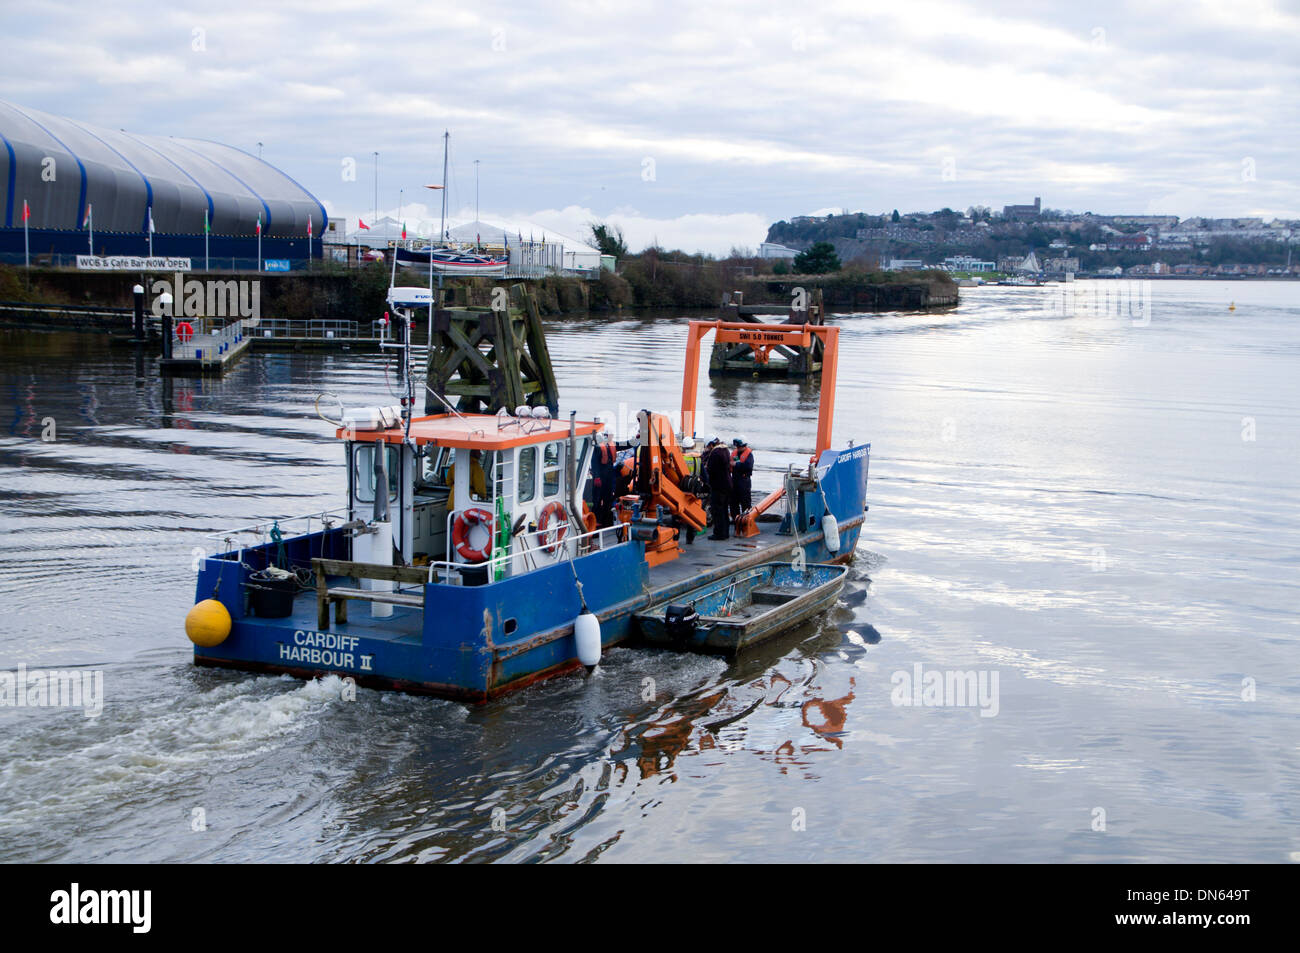 Cardiff Bay Harbour Authority Boat, Cardiff Bay, Wales. Stock Photo